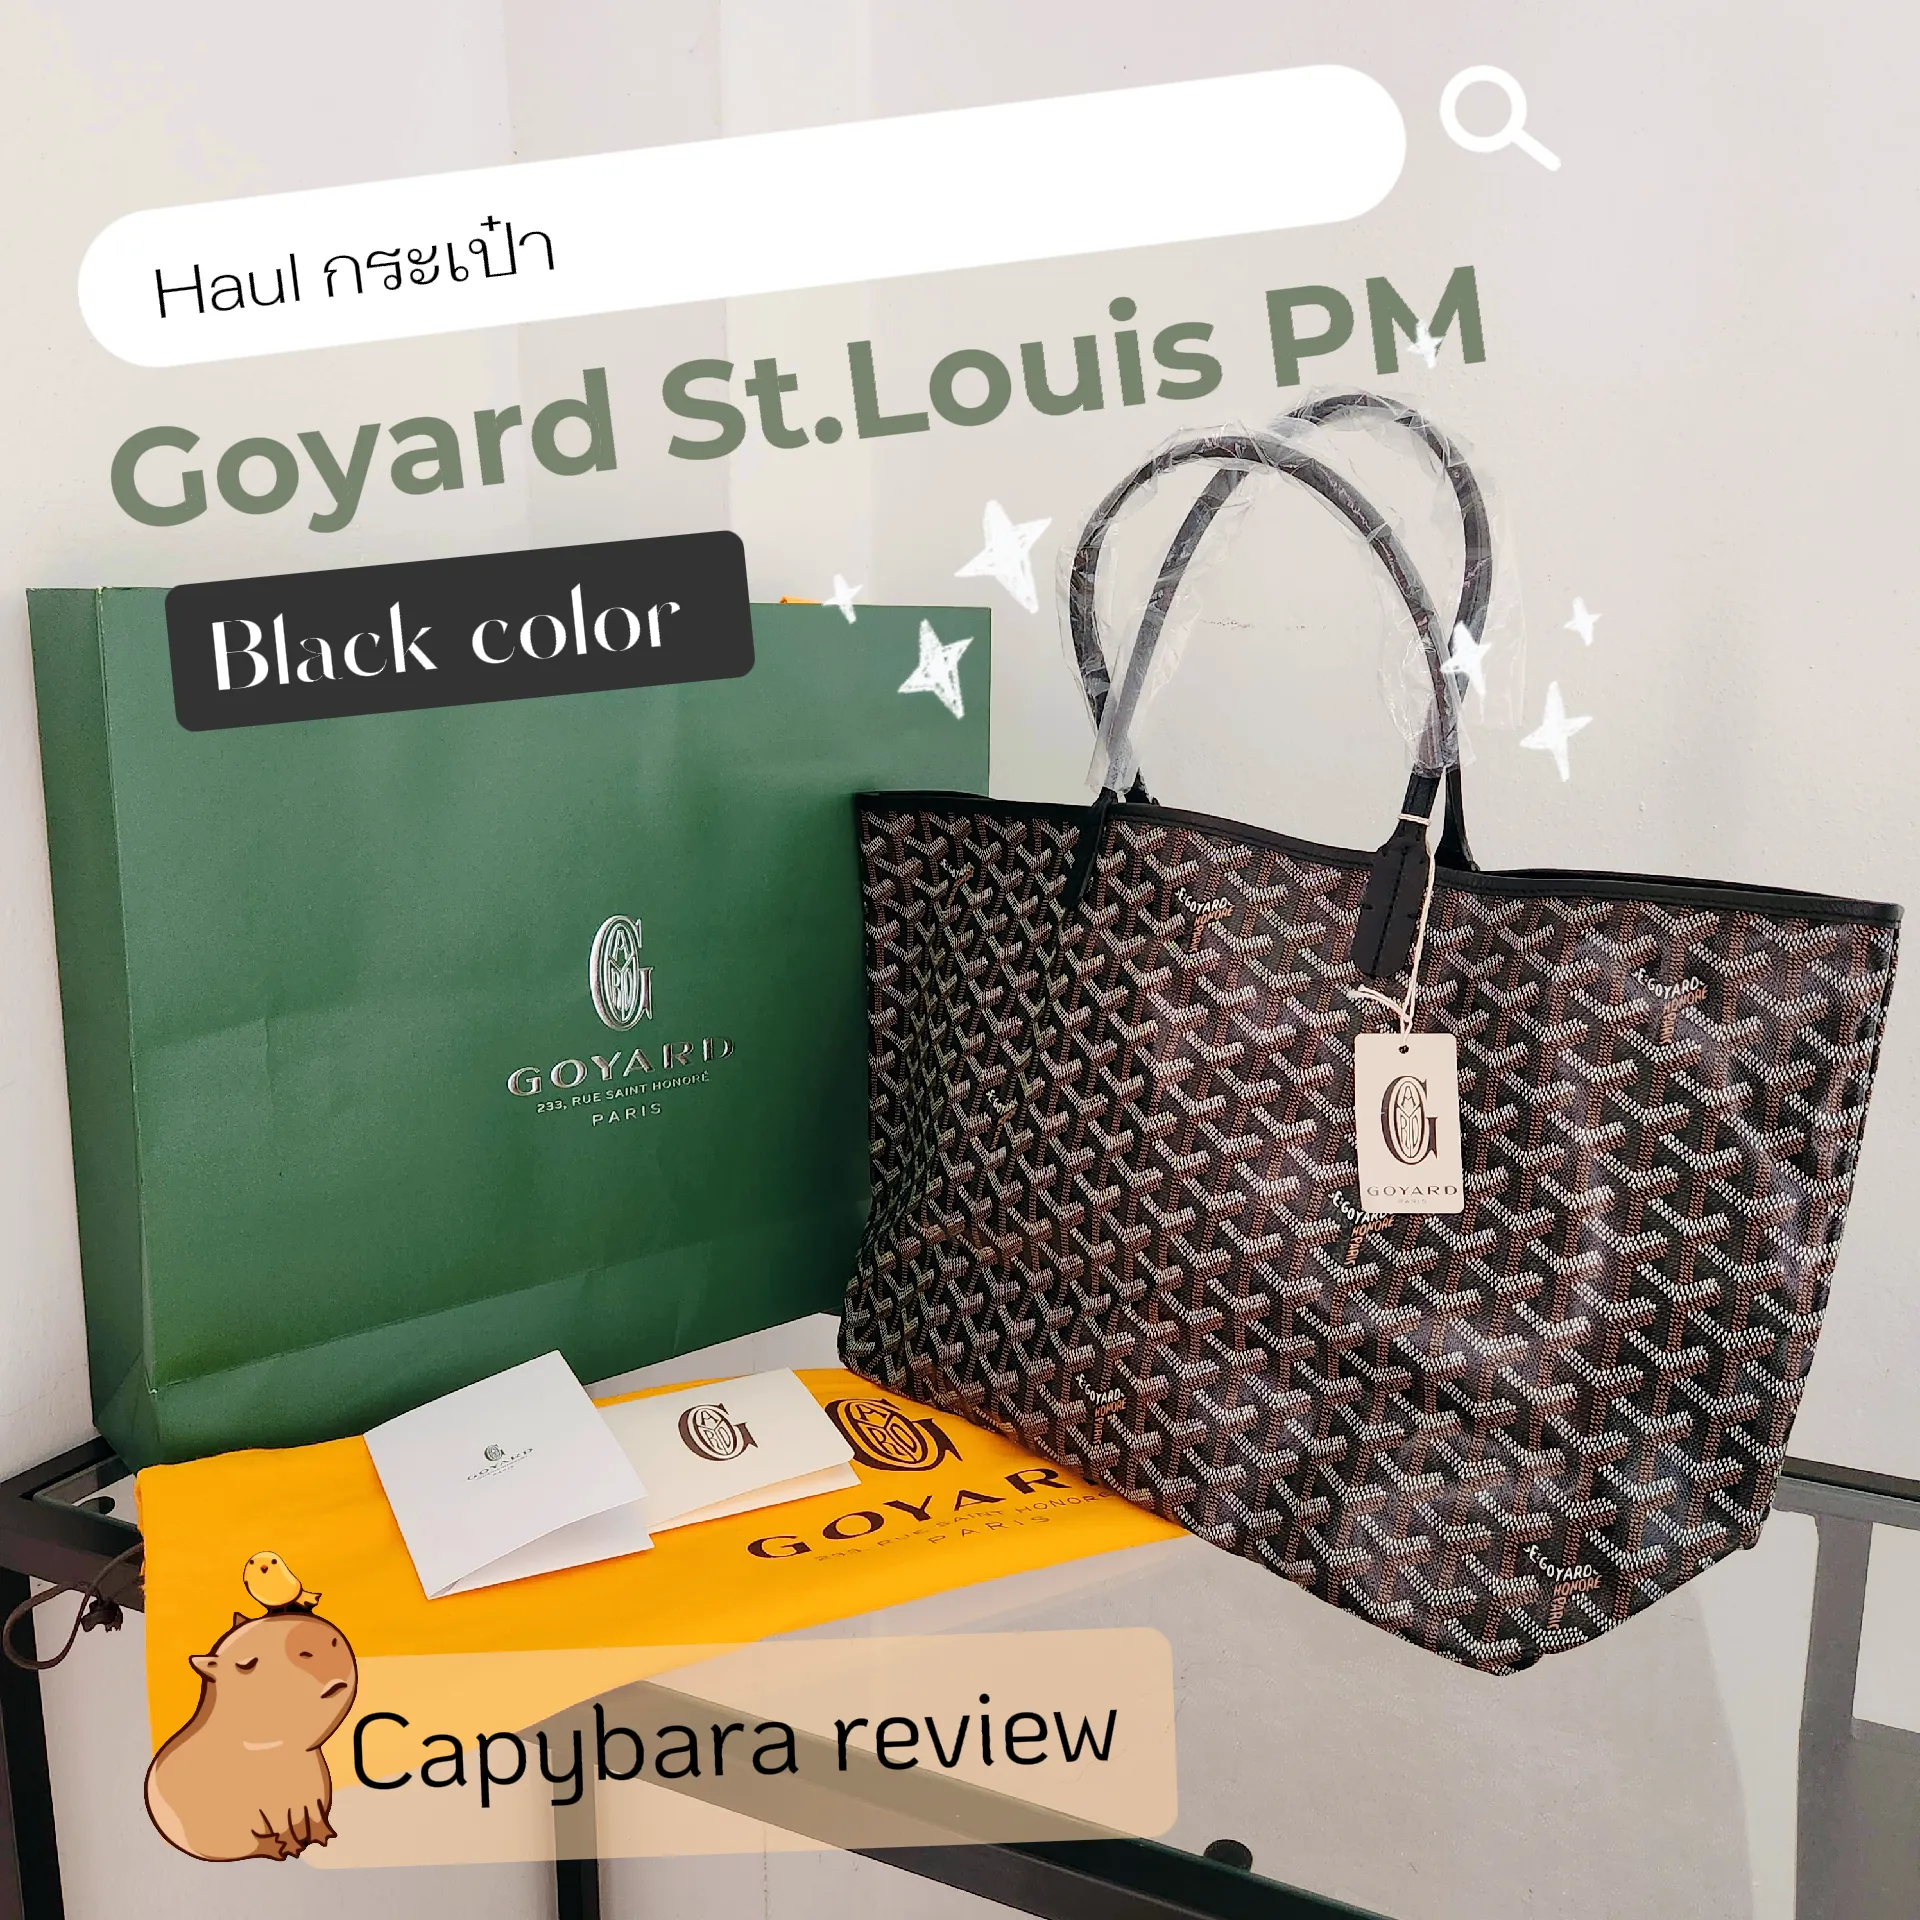 Goyard st louis pm bag size review ✓, Gallery posted by Nidsulove